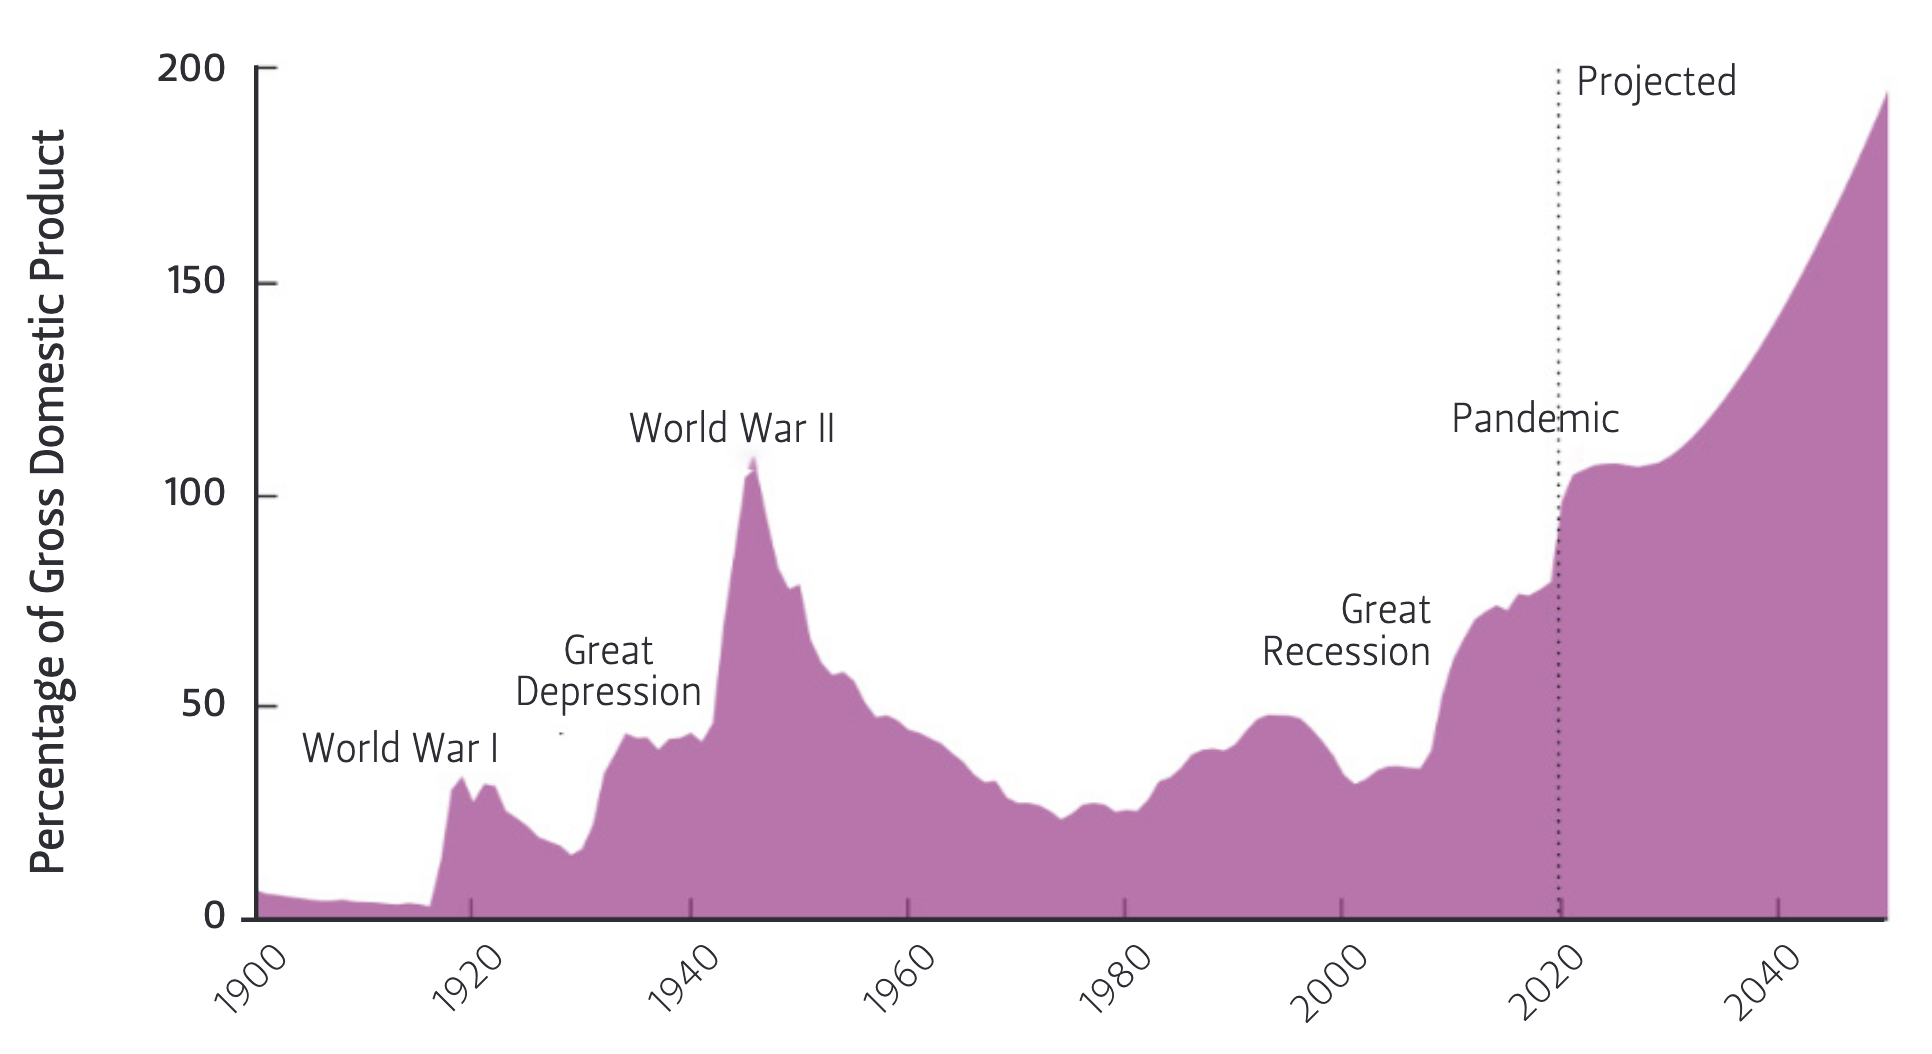 FIGURE 1 — FEDERAL DEBT HELD BY THE PUBLIC (1900 TO 2050)